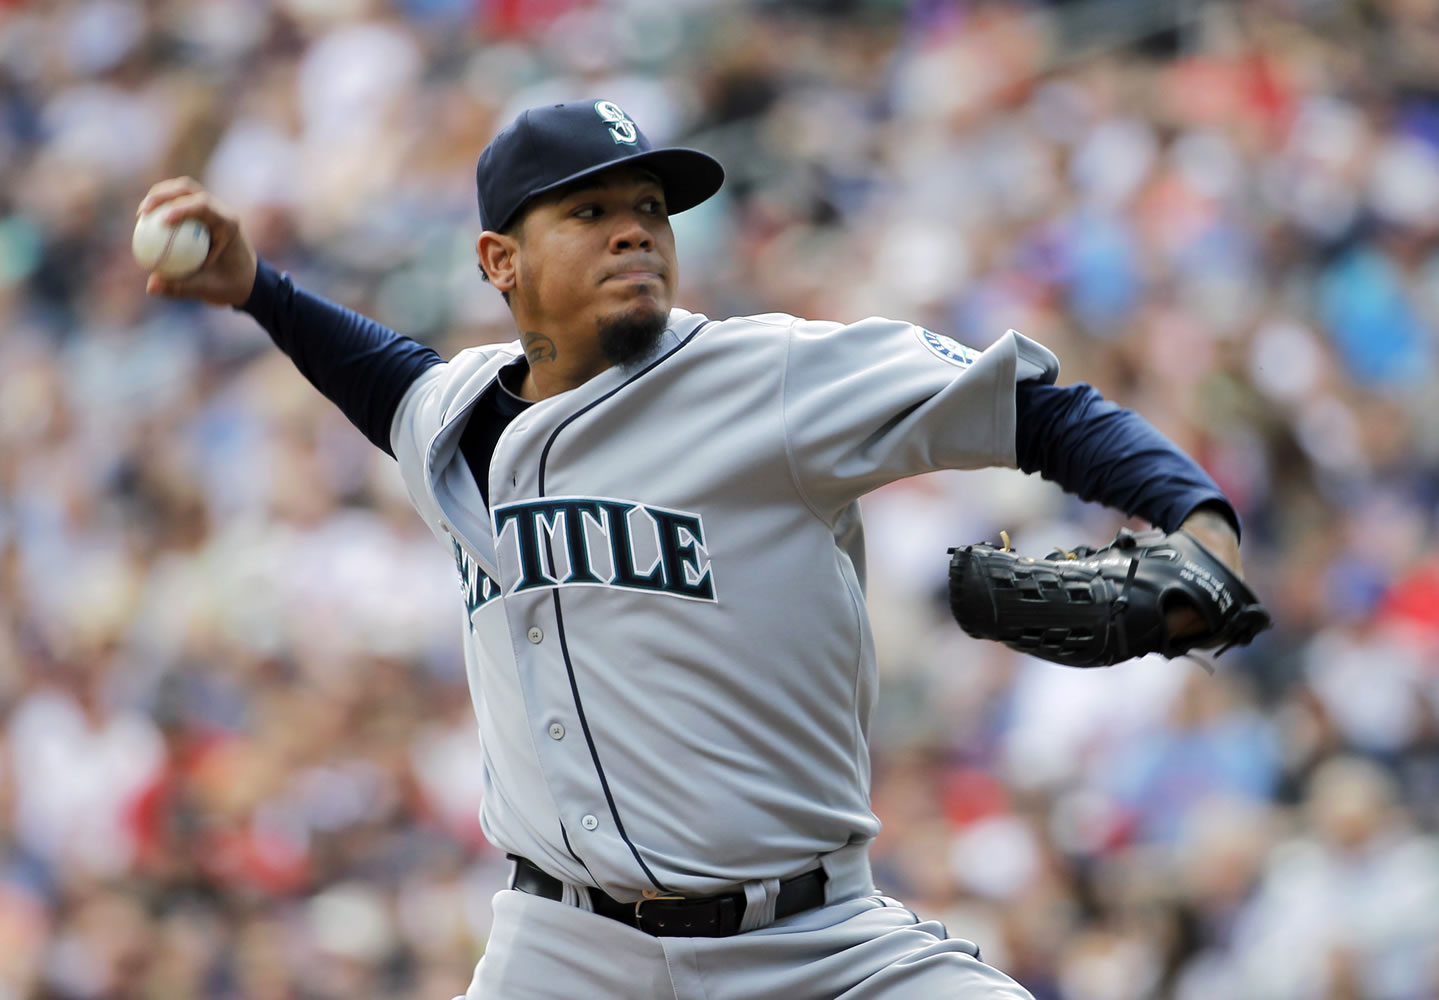 Felix Hernandez went eight innings Sunday, giving up two runs on seven hits while striking out five and walking one in the Mariners' 6-2 win at Minnesota.